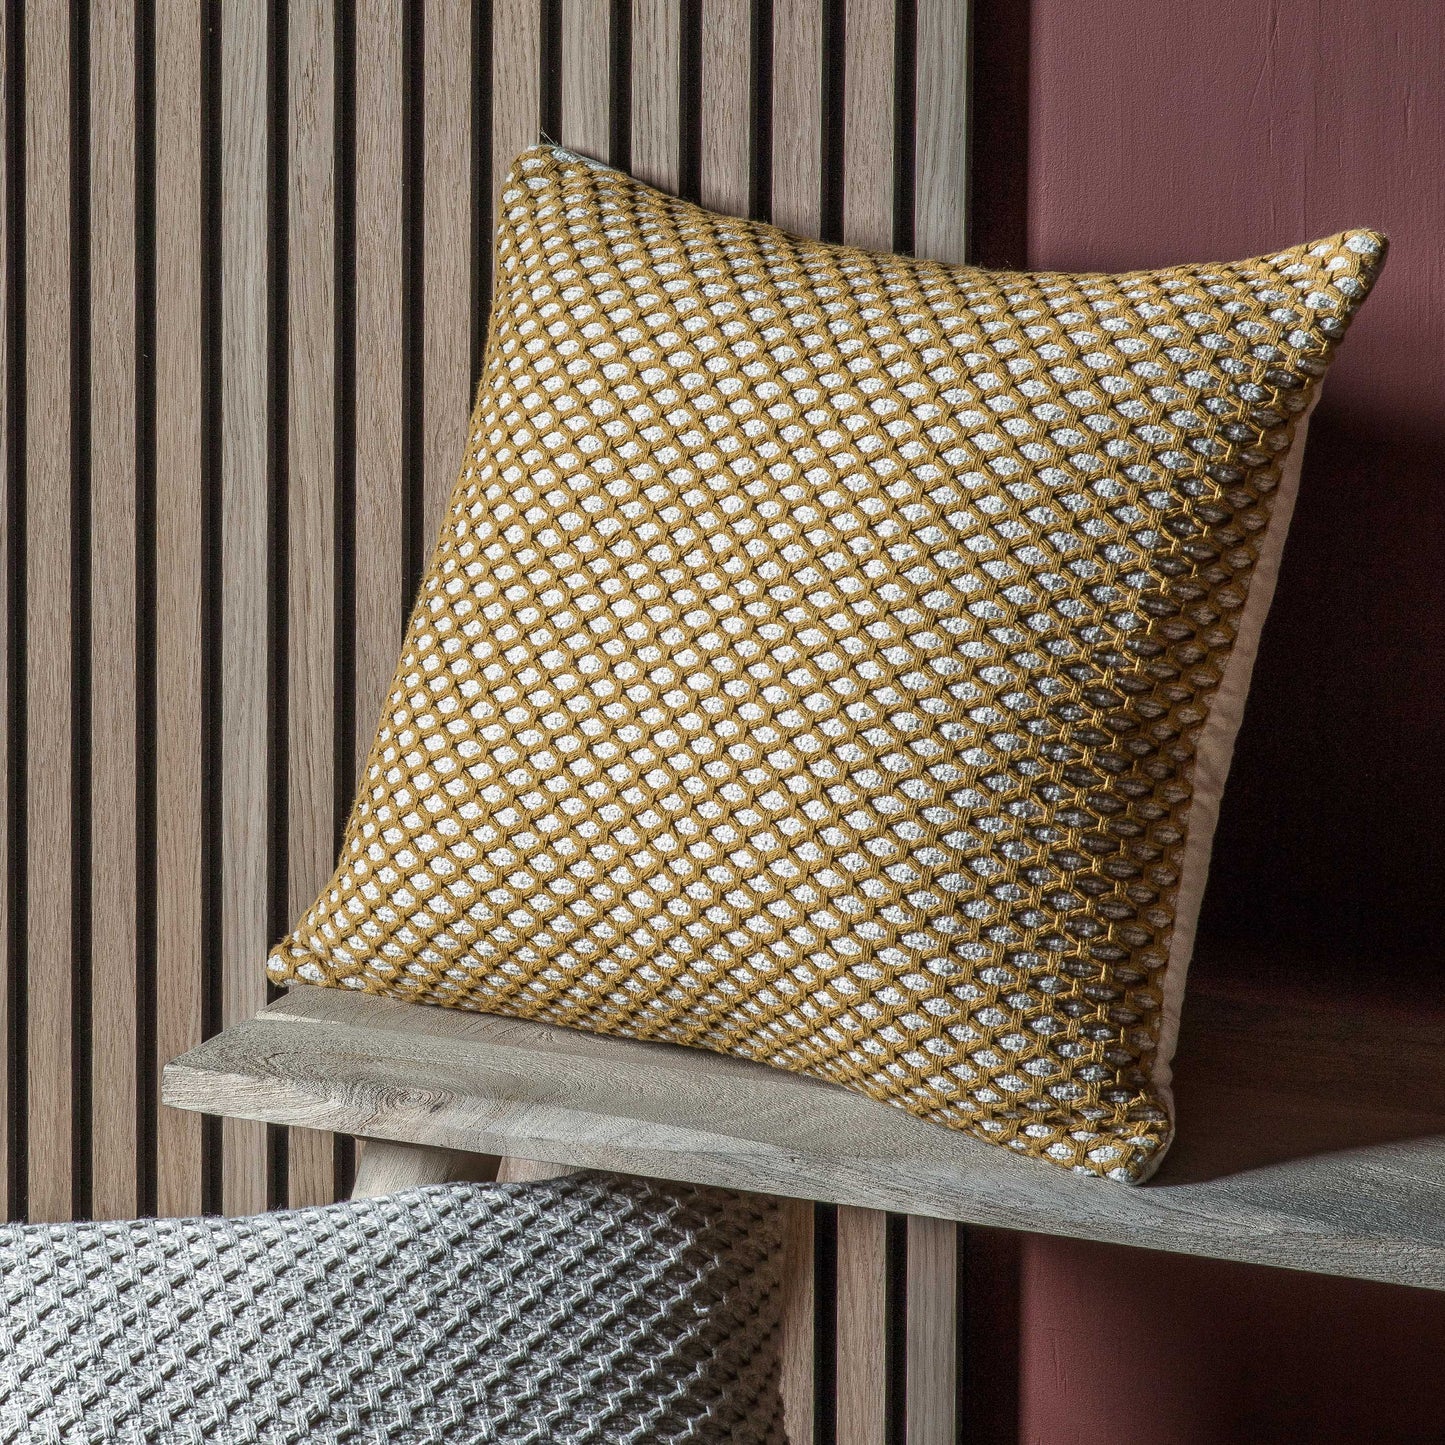 A Bittaford Cushion Ochre 550x550mm by Kikiathome.co.uk on a wooden shelf, perfect for interior decor.